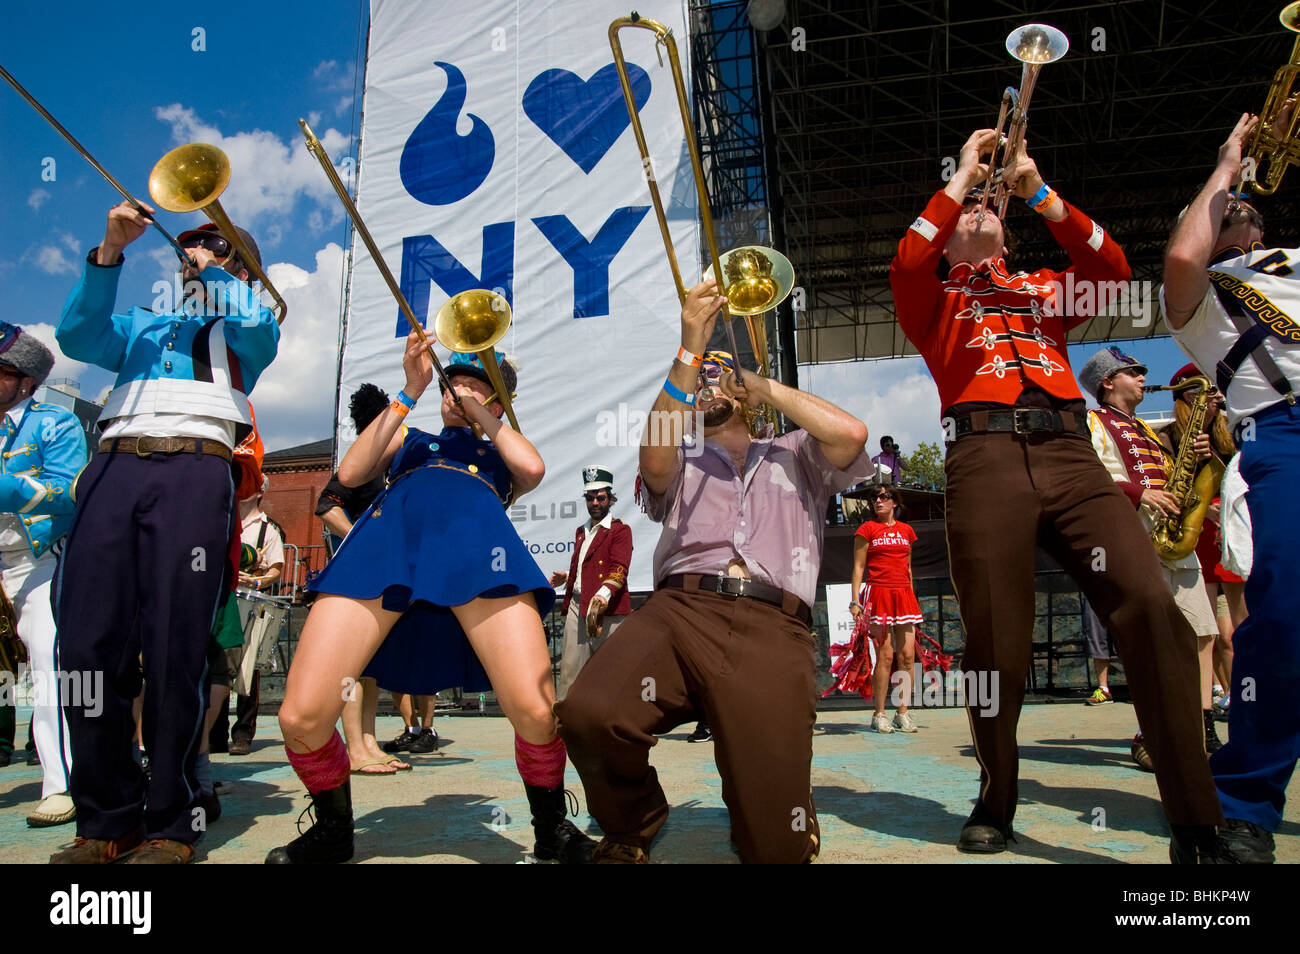 "Mucca Pazza," marching Band aus Chicago, führt am McCarren Park Pool in Brooklyn, New York. Stockfoto